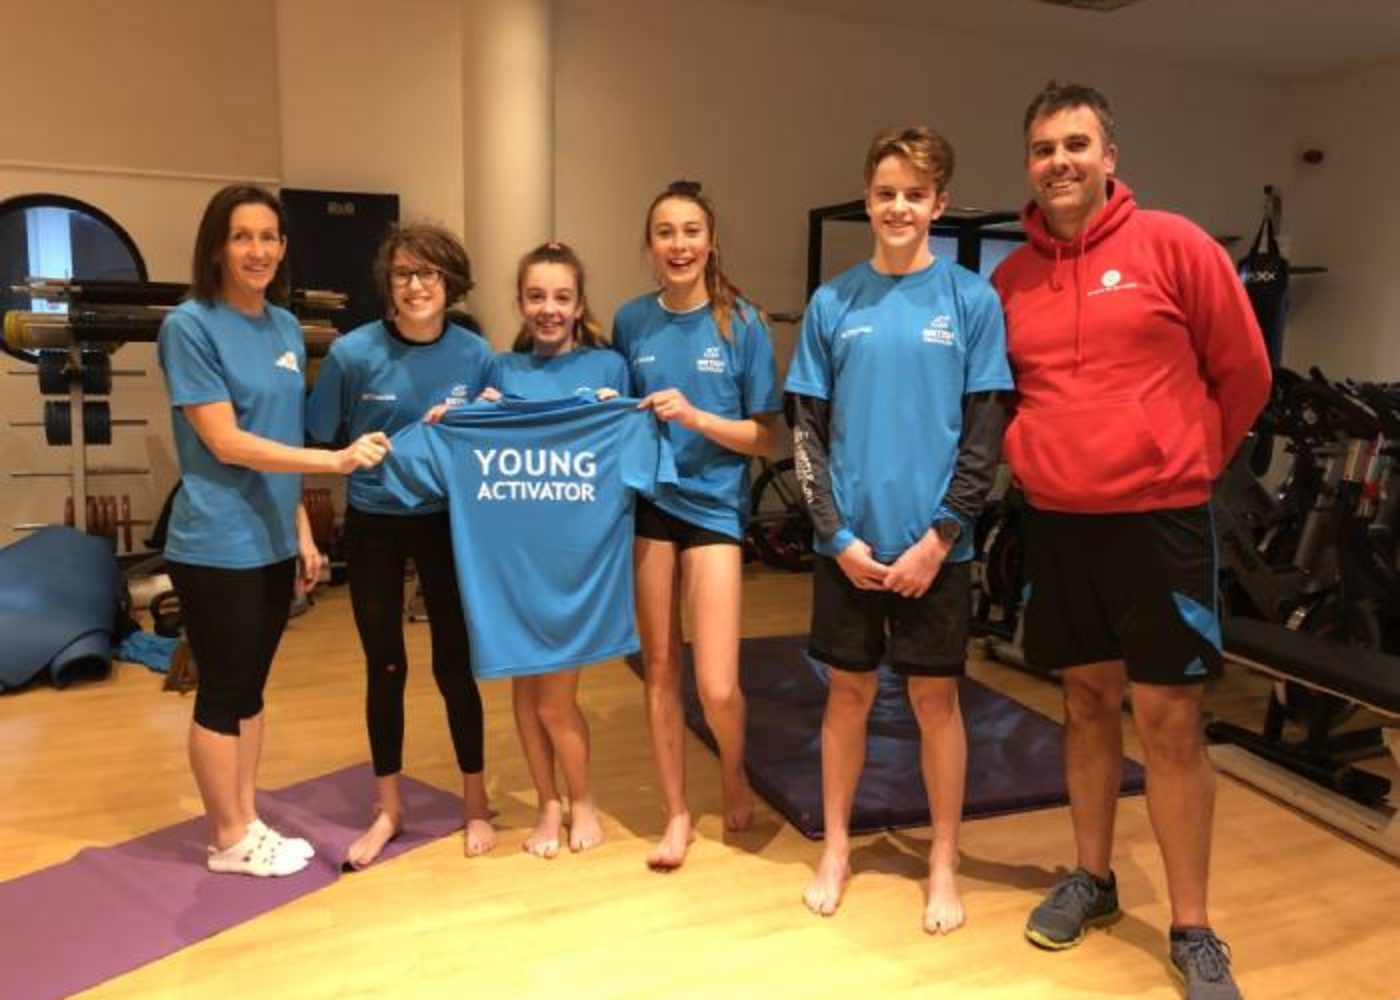 IOW SPORTS FEDERATION HELPS YOUNGSTERS FROM THE ISLE OF WIGHT JUNIOR TRIATHLON CLUB